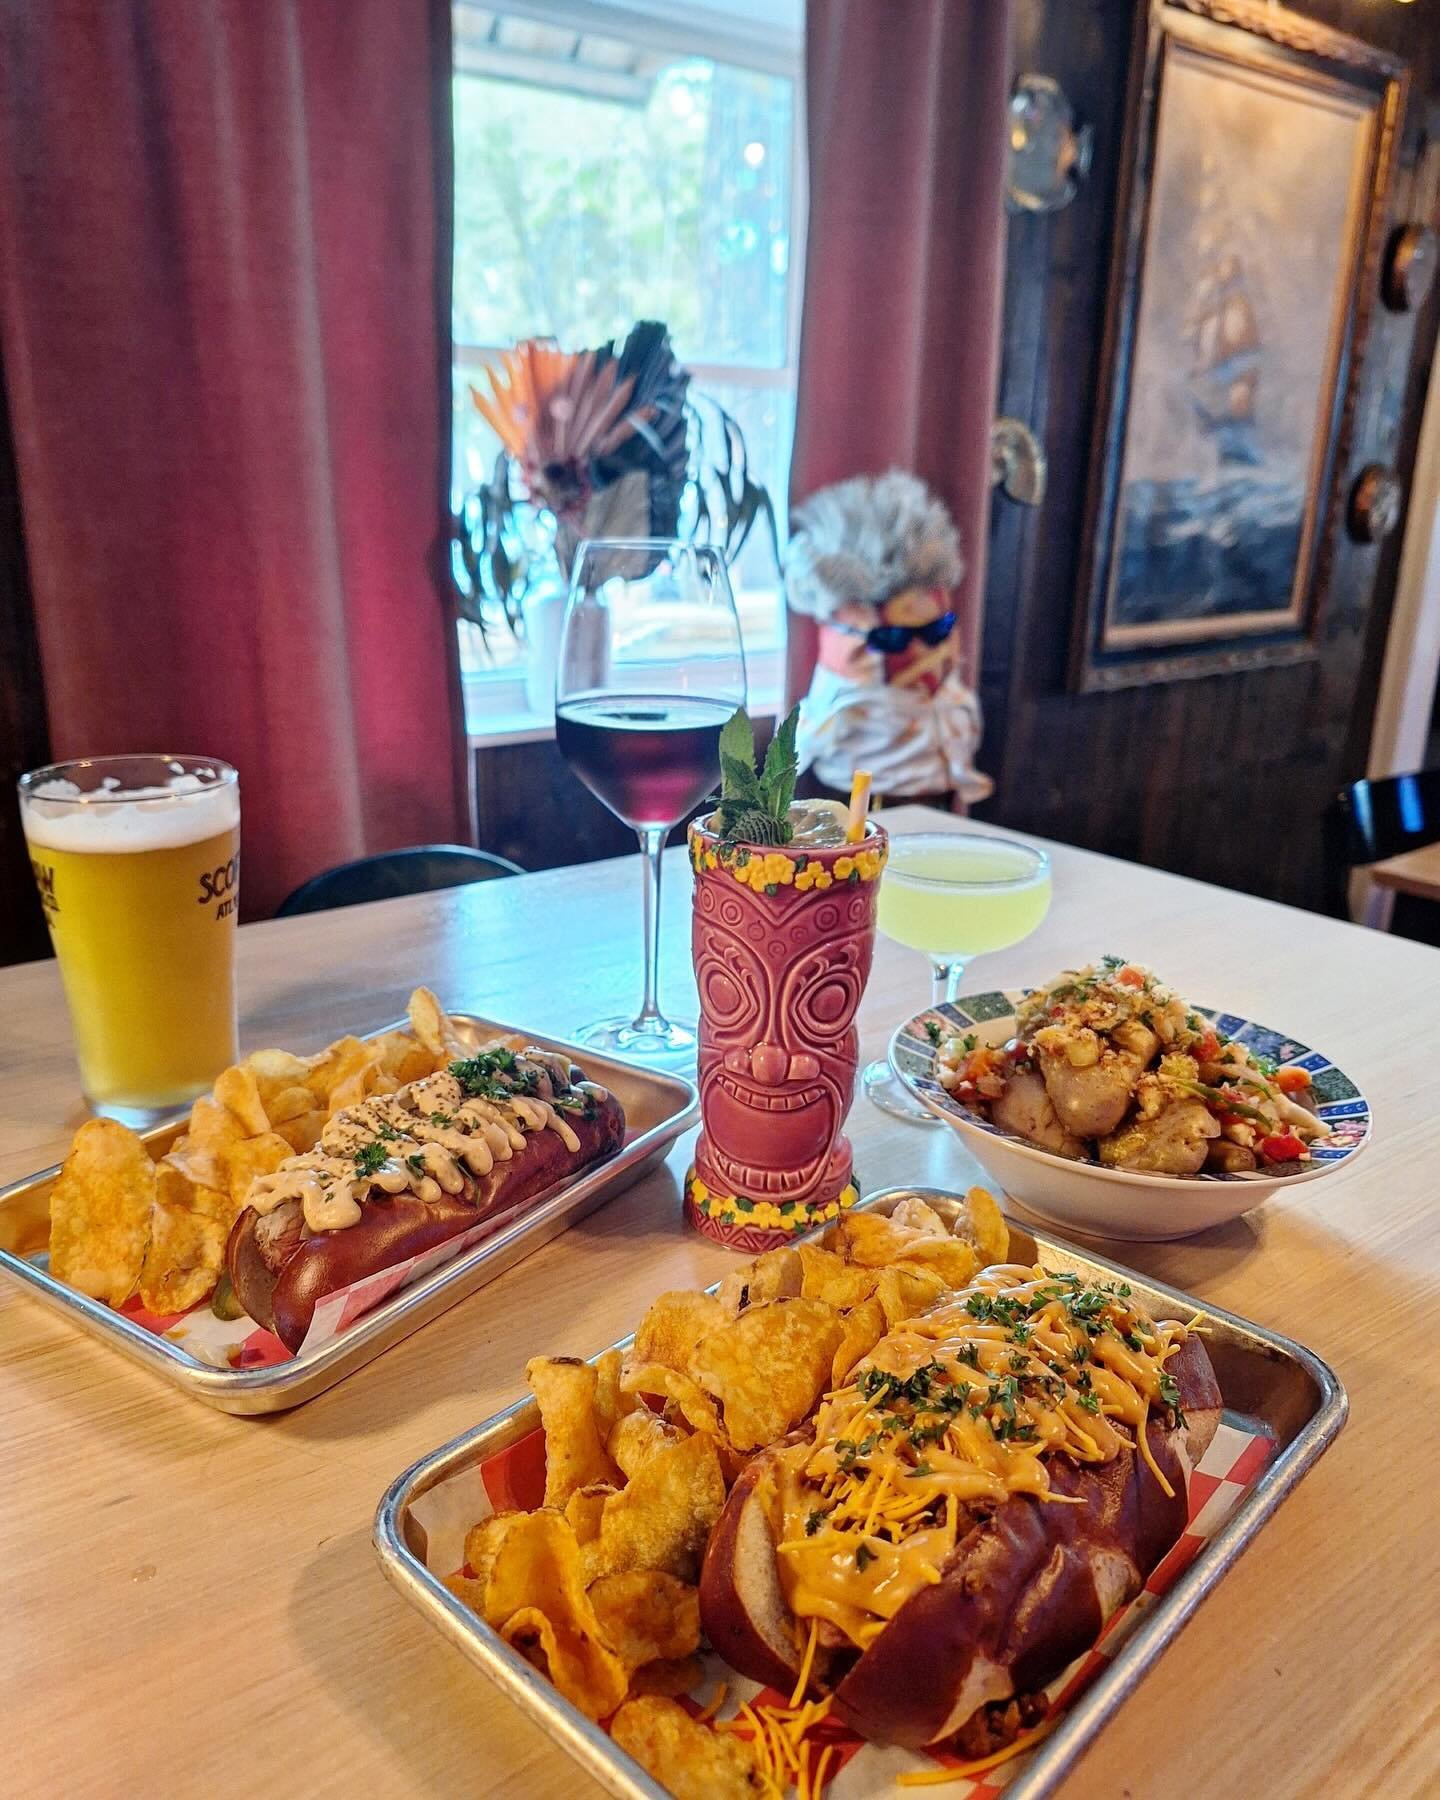 We have a new dog 🌭 on the menu tonight and the vegan Glizzy (chili cheese dog) is back on! Come &amp; get it 🥂

As always, food to 10pm this evenings with drinks &lsquo;til.
We look forward to taking care of you 🍸

#HotDogs #HotDogObsessed #Fancy